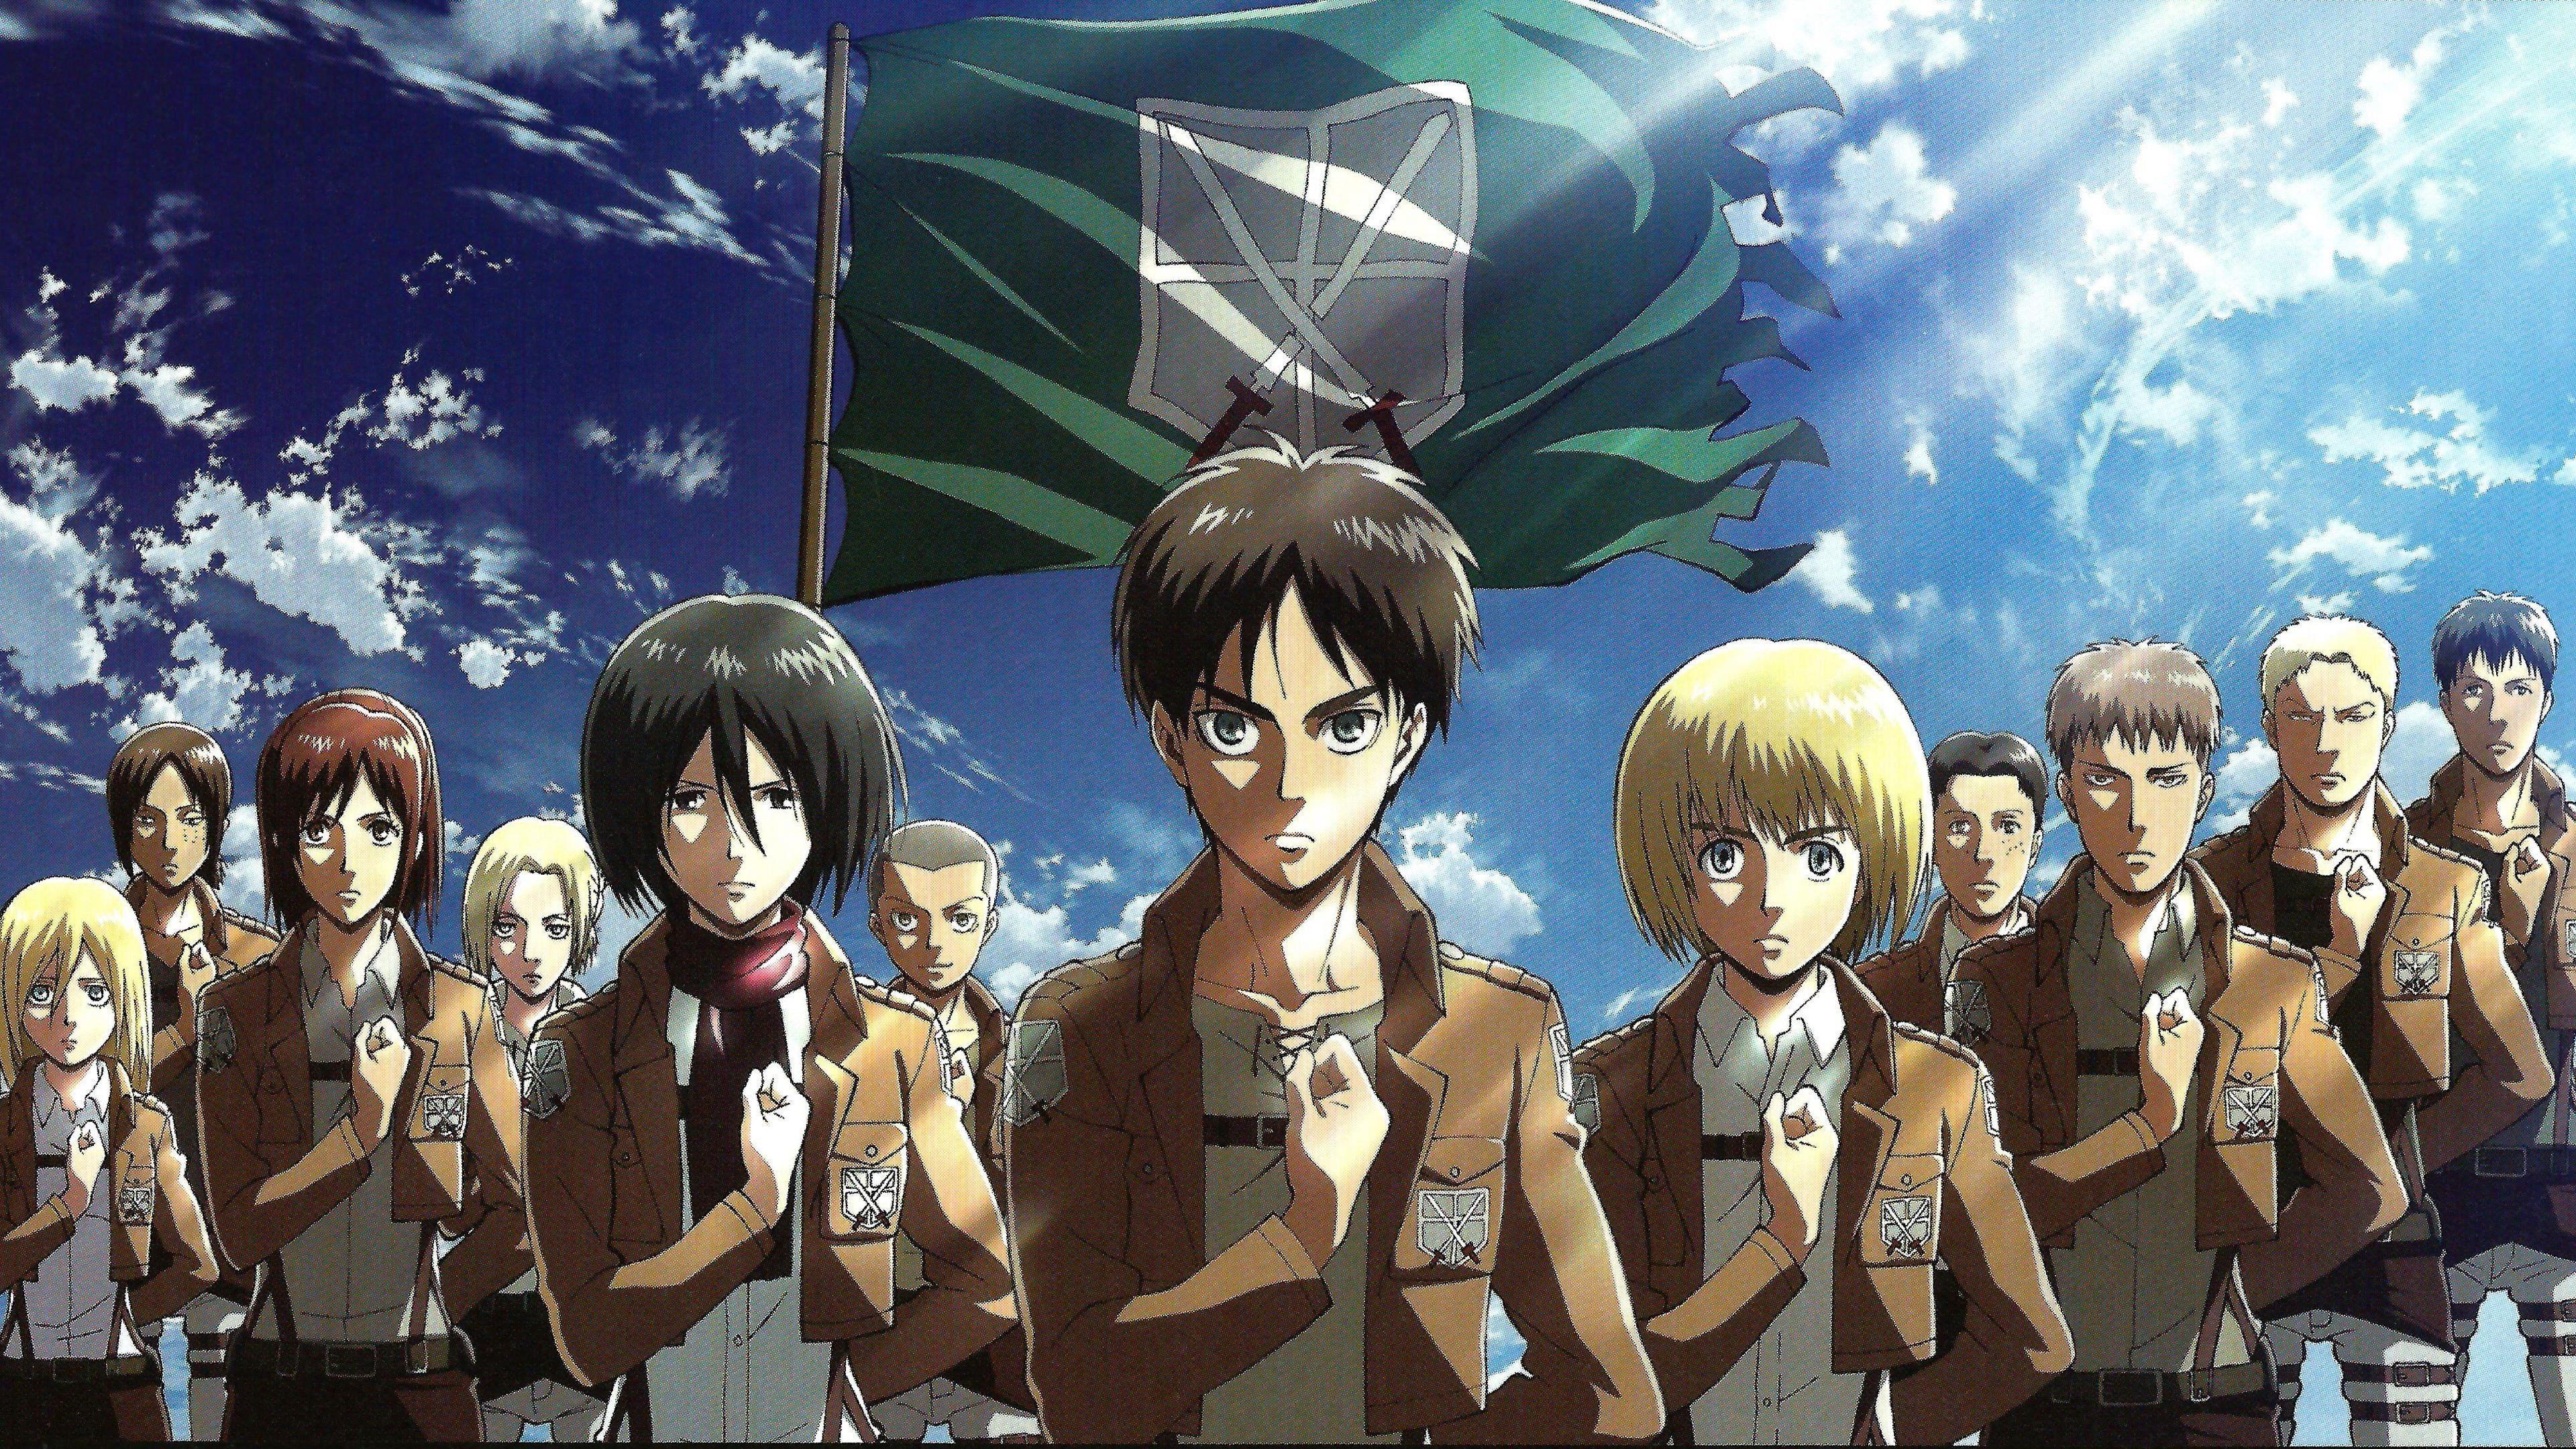 List of All Attack on Titan Anime Characters Ranked by Fans